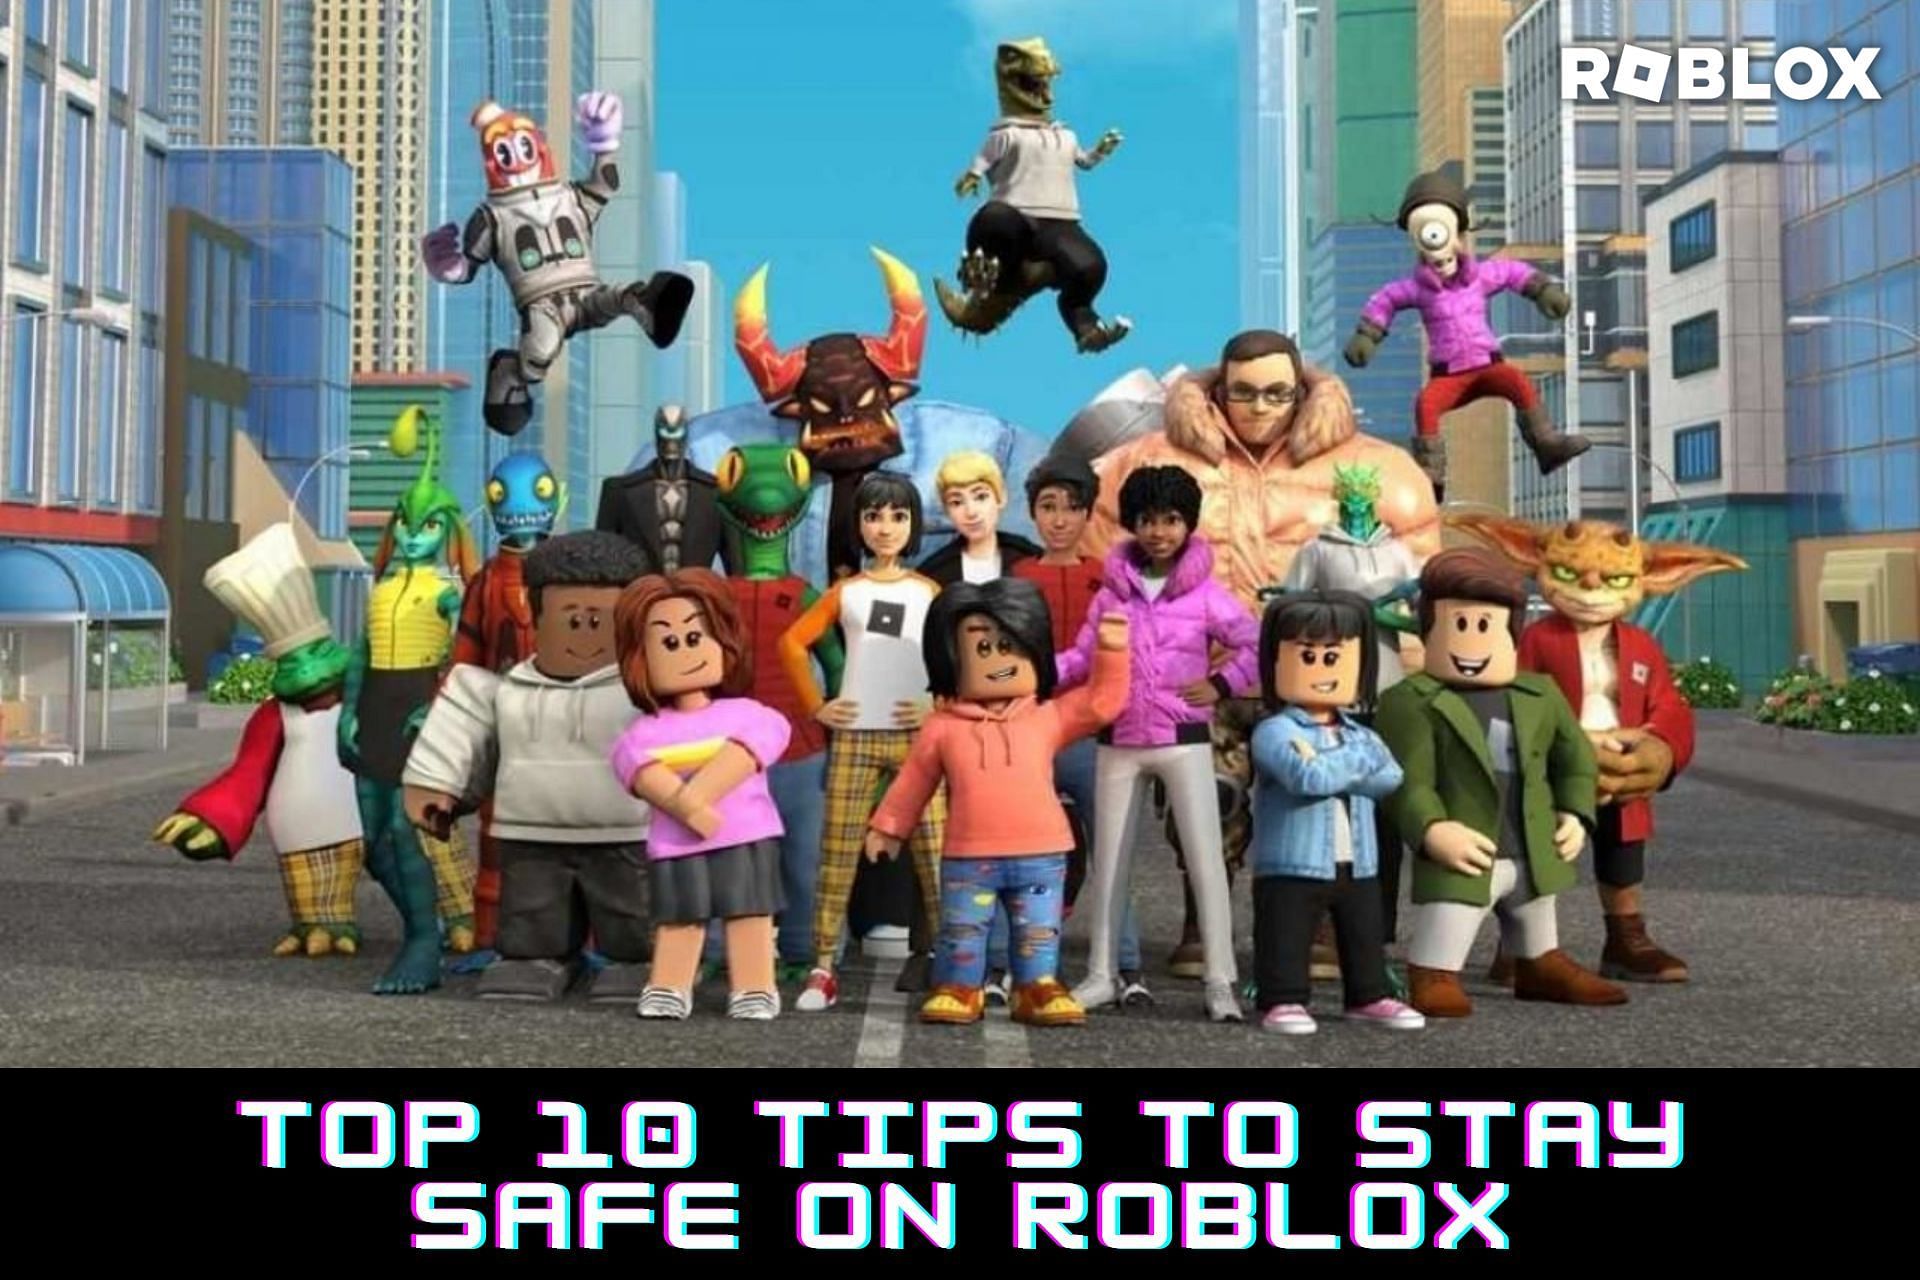 Roblox hacks – handy tips for staying safe